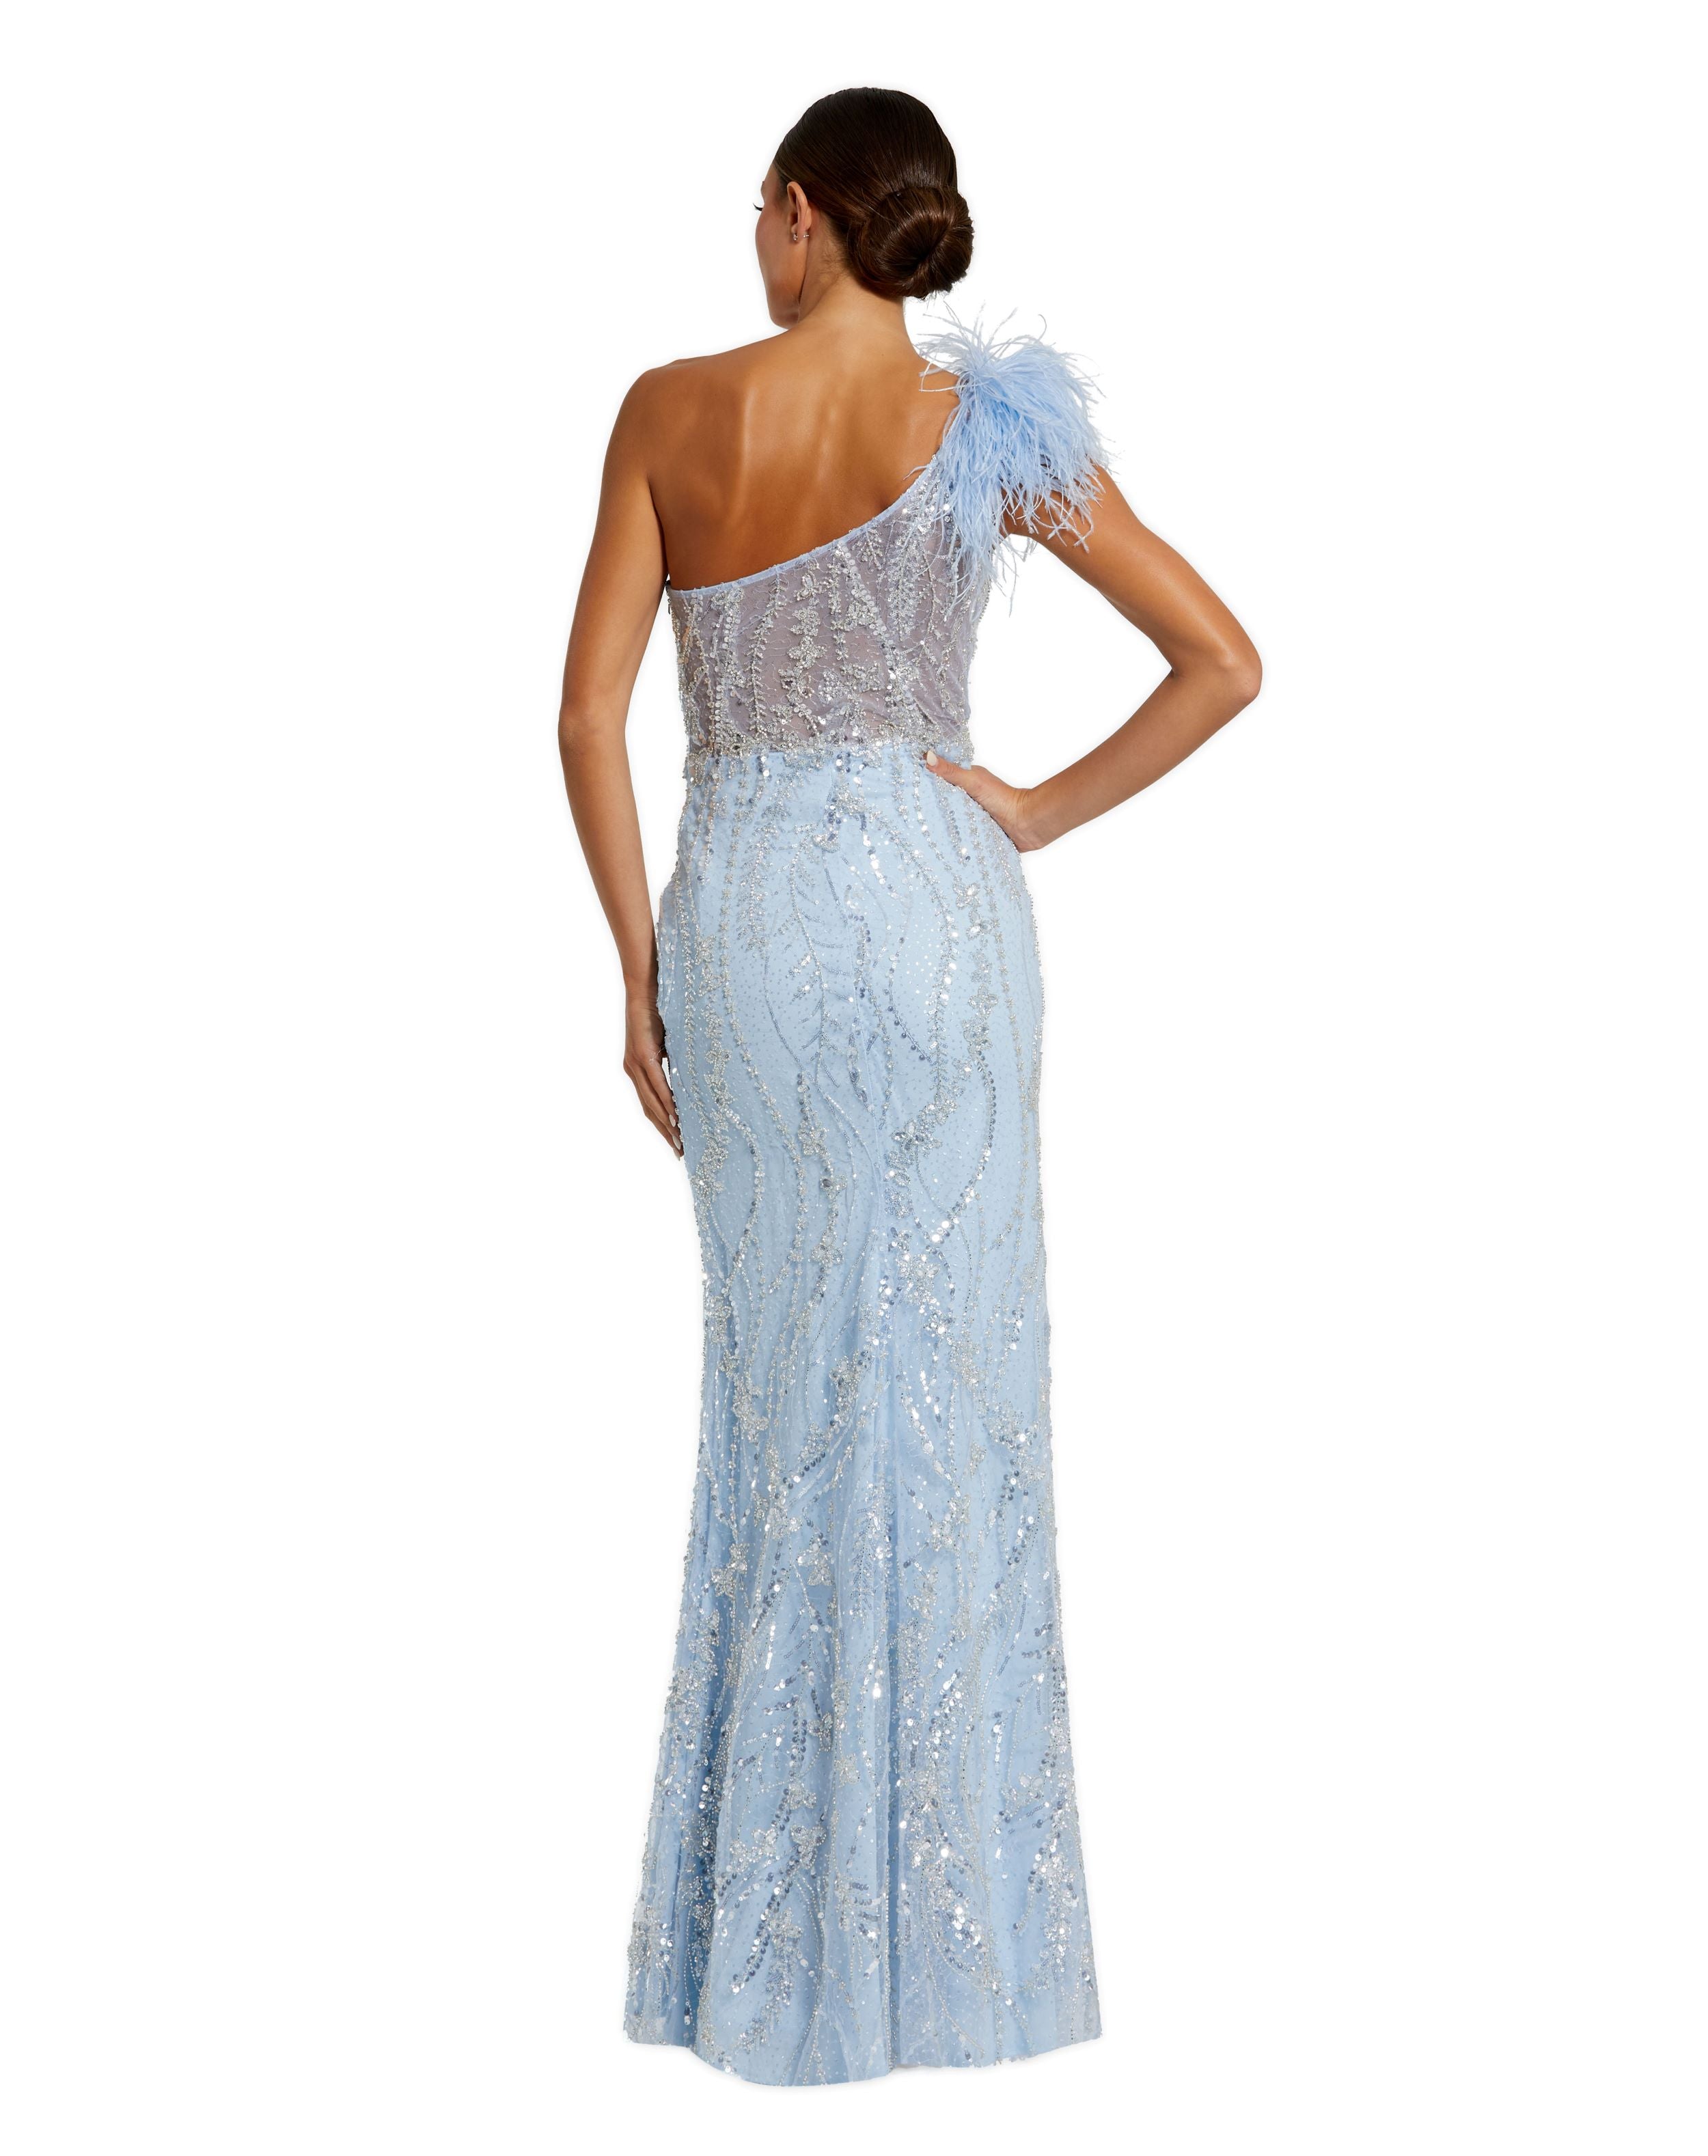 Feathered One Shoulder Embroidered Applique Gown